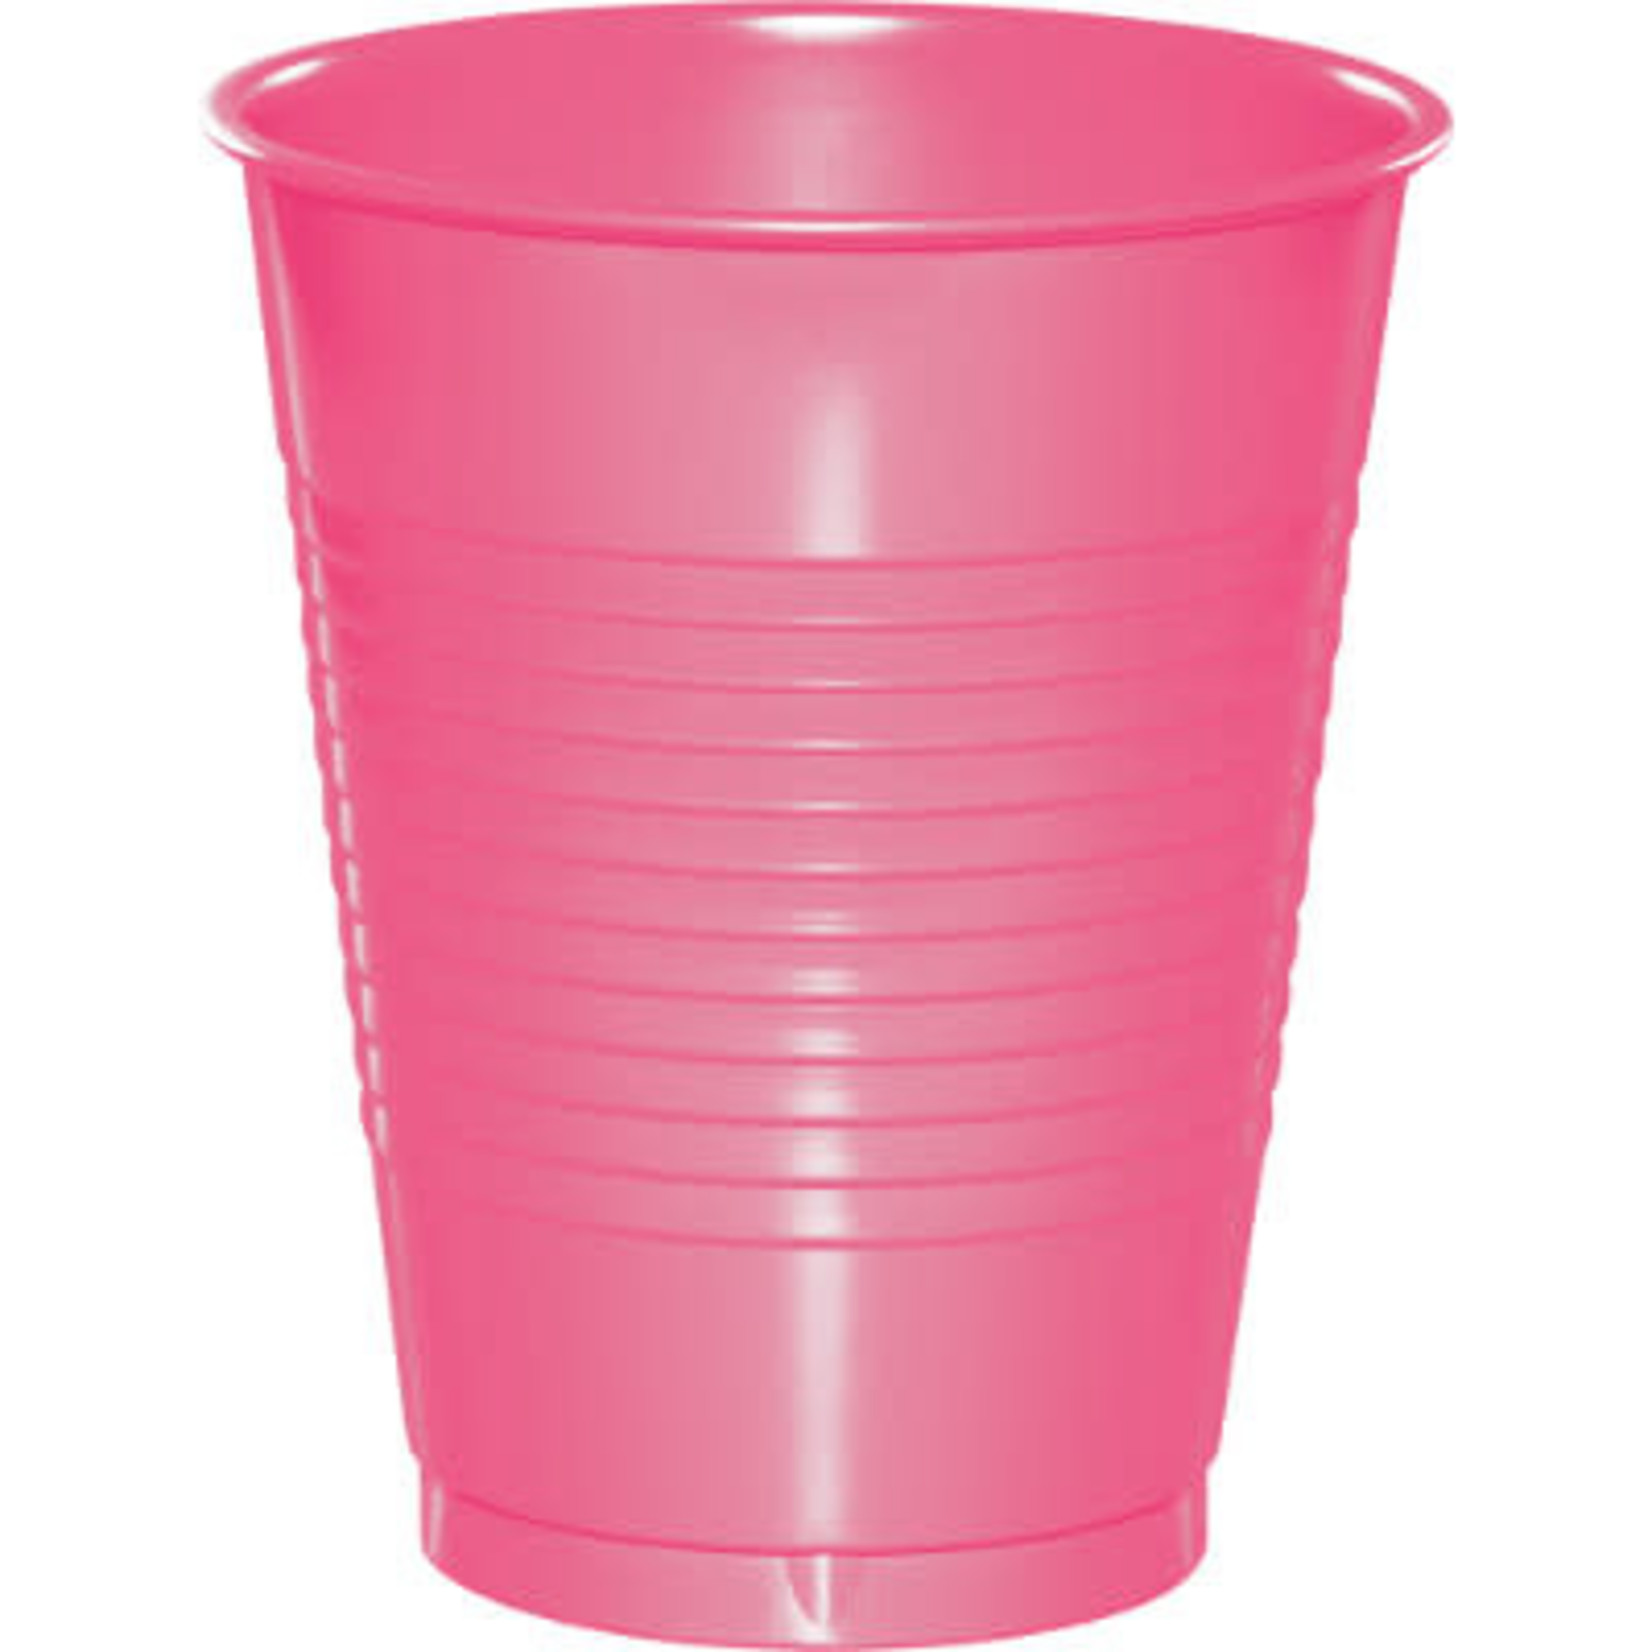 Touch of Color 16oz. Candy Pink Plastic Cups - 20ct.